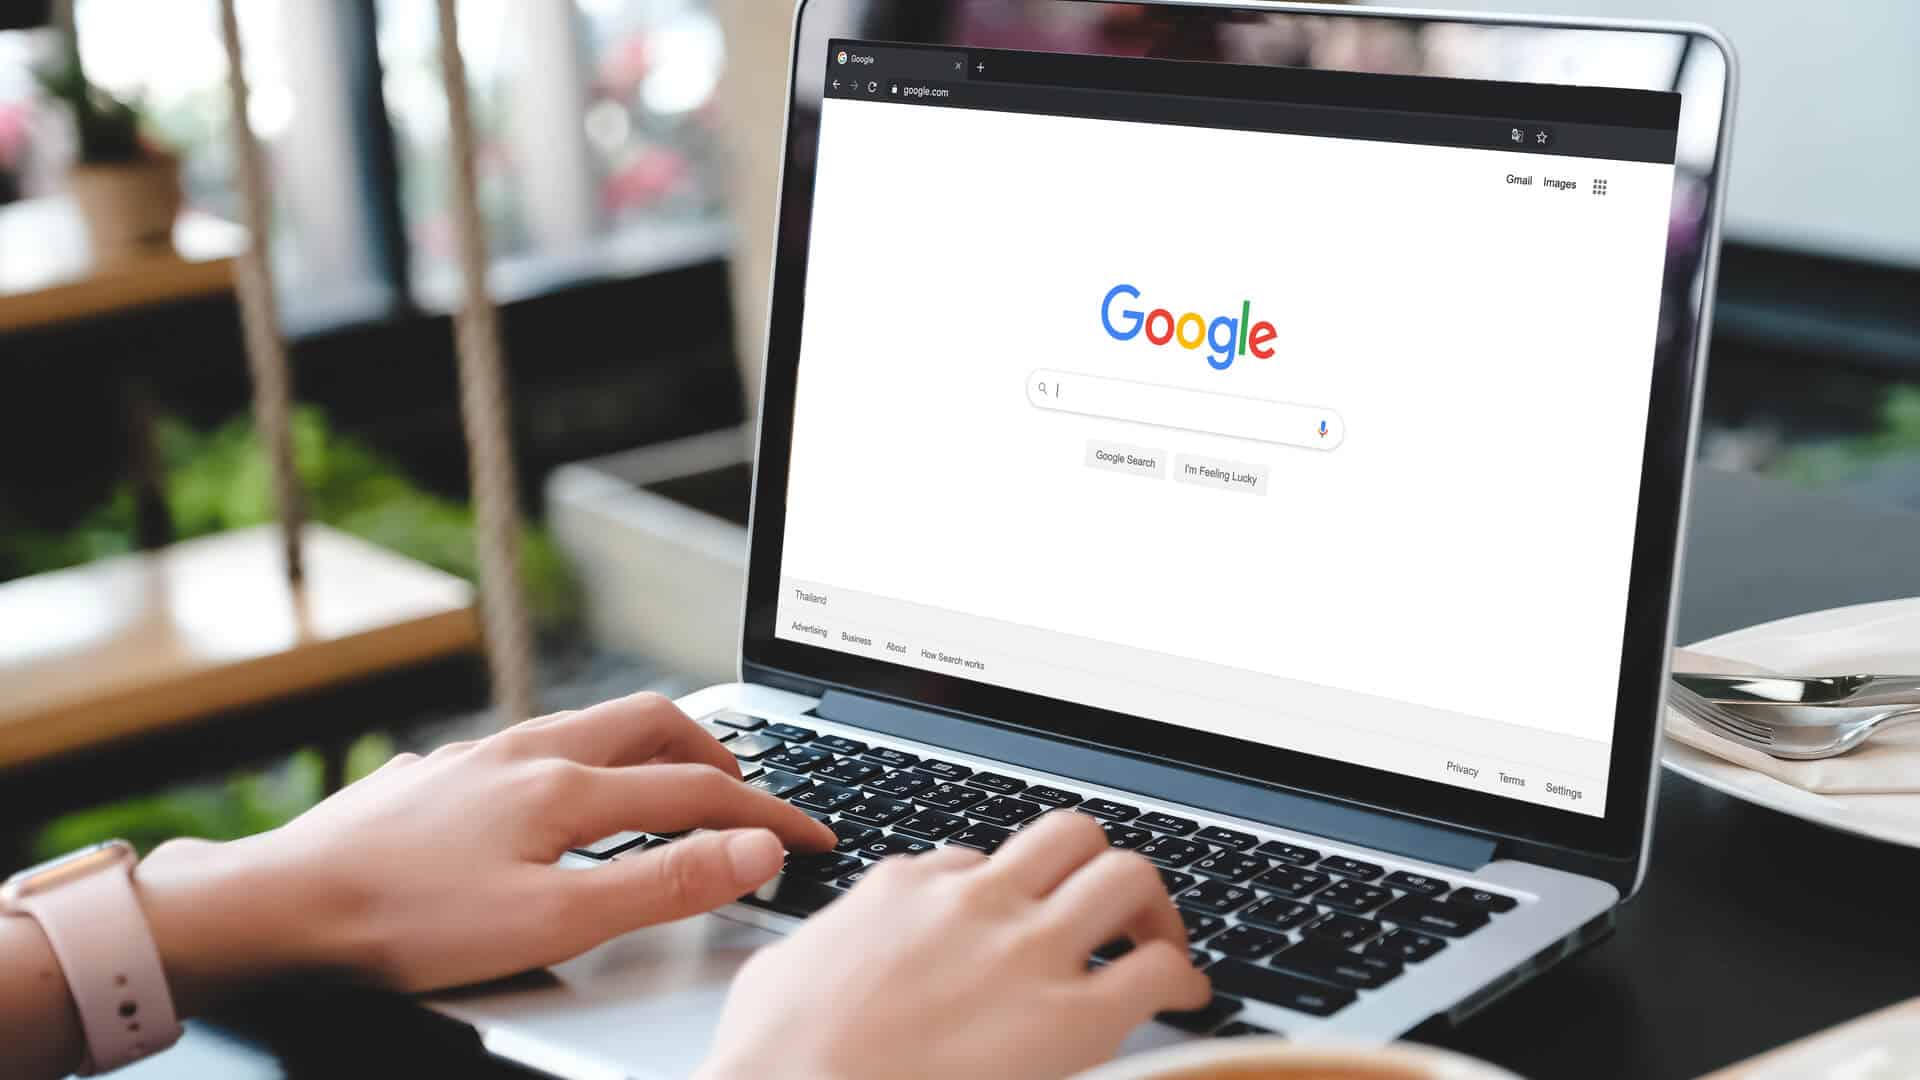 Search marketers should remember their power in the Google-SEO relationship